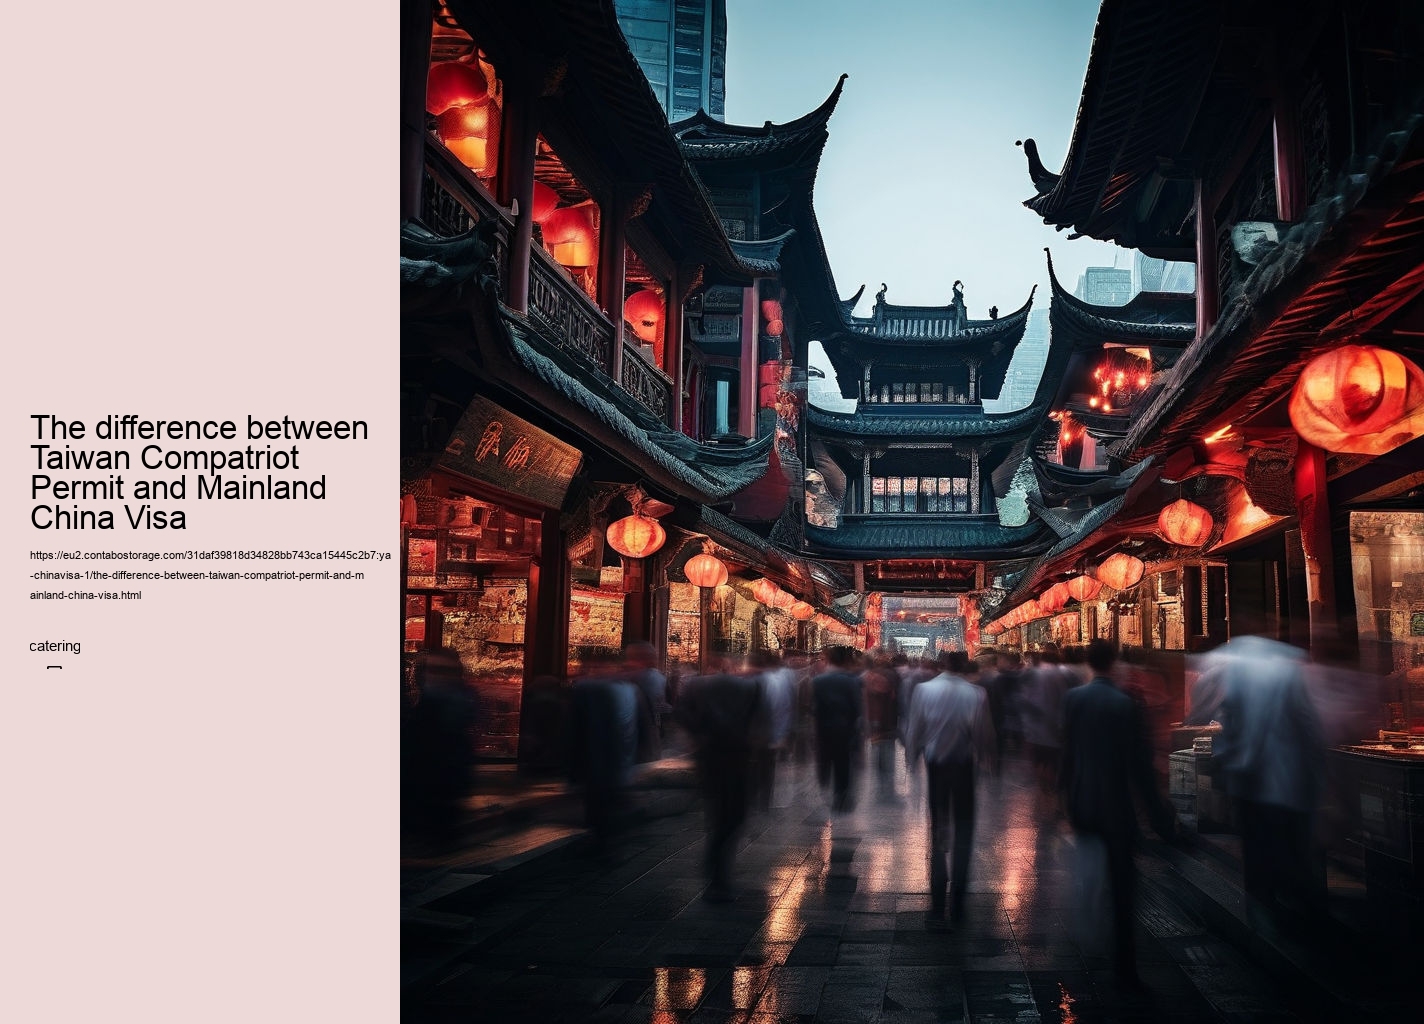 The difference between Taiwan Compatriot Permit and Mainland China Visa